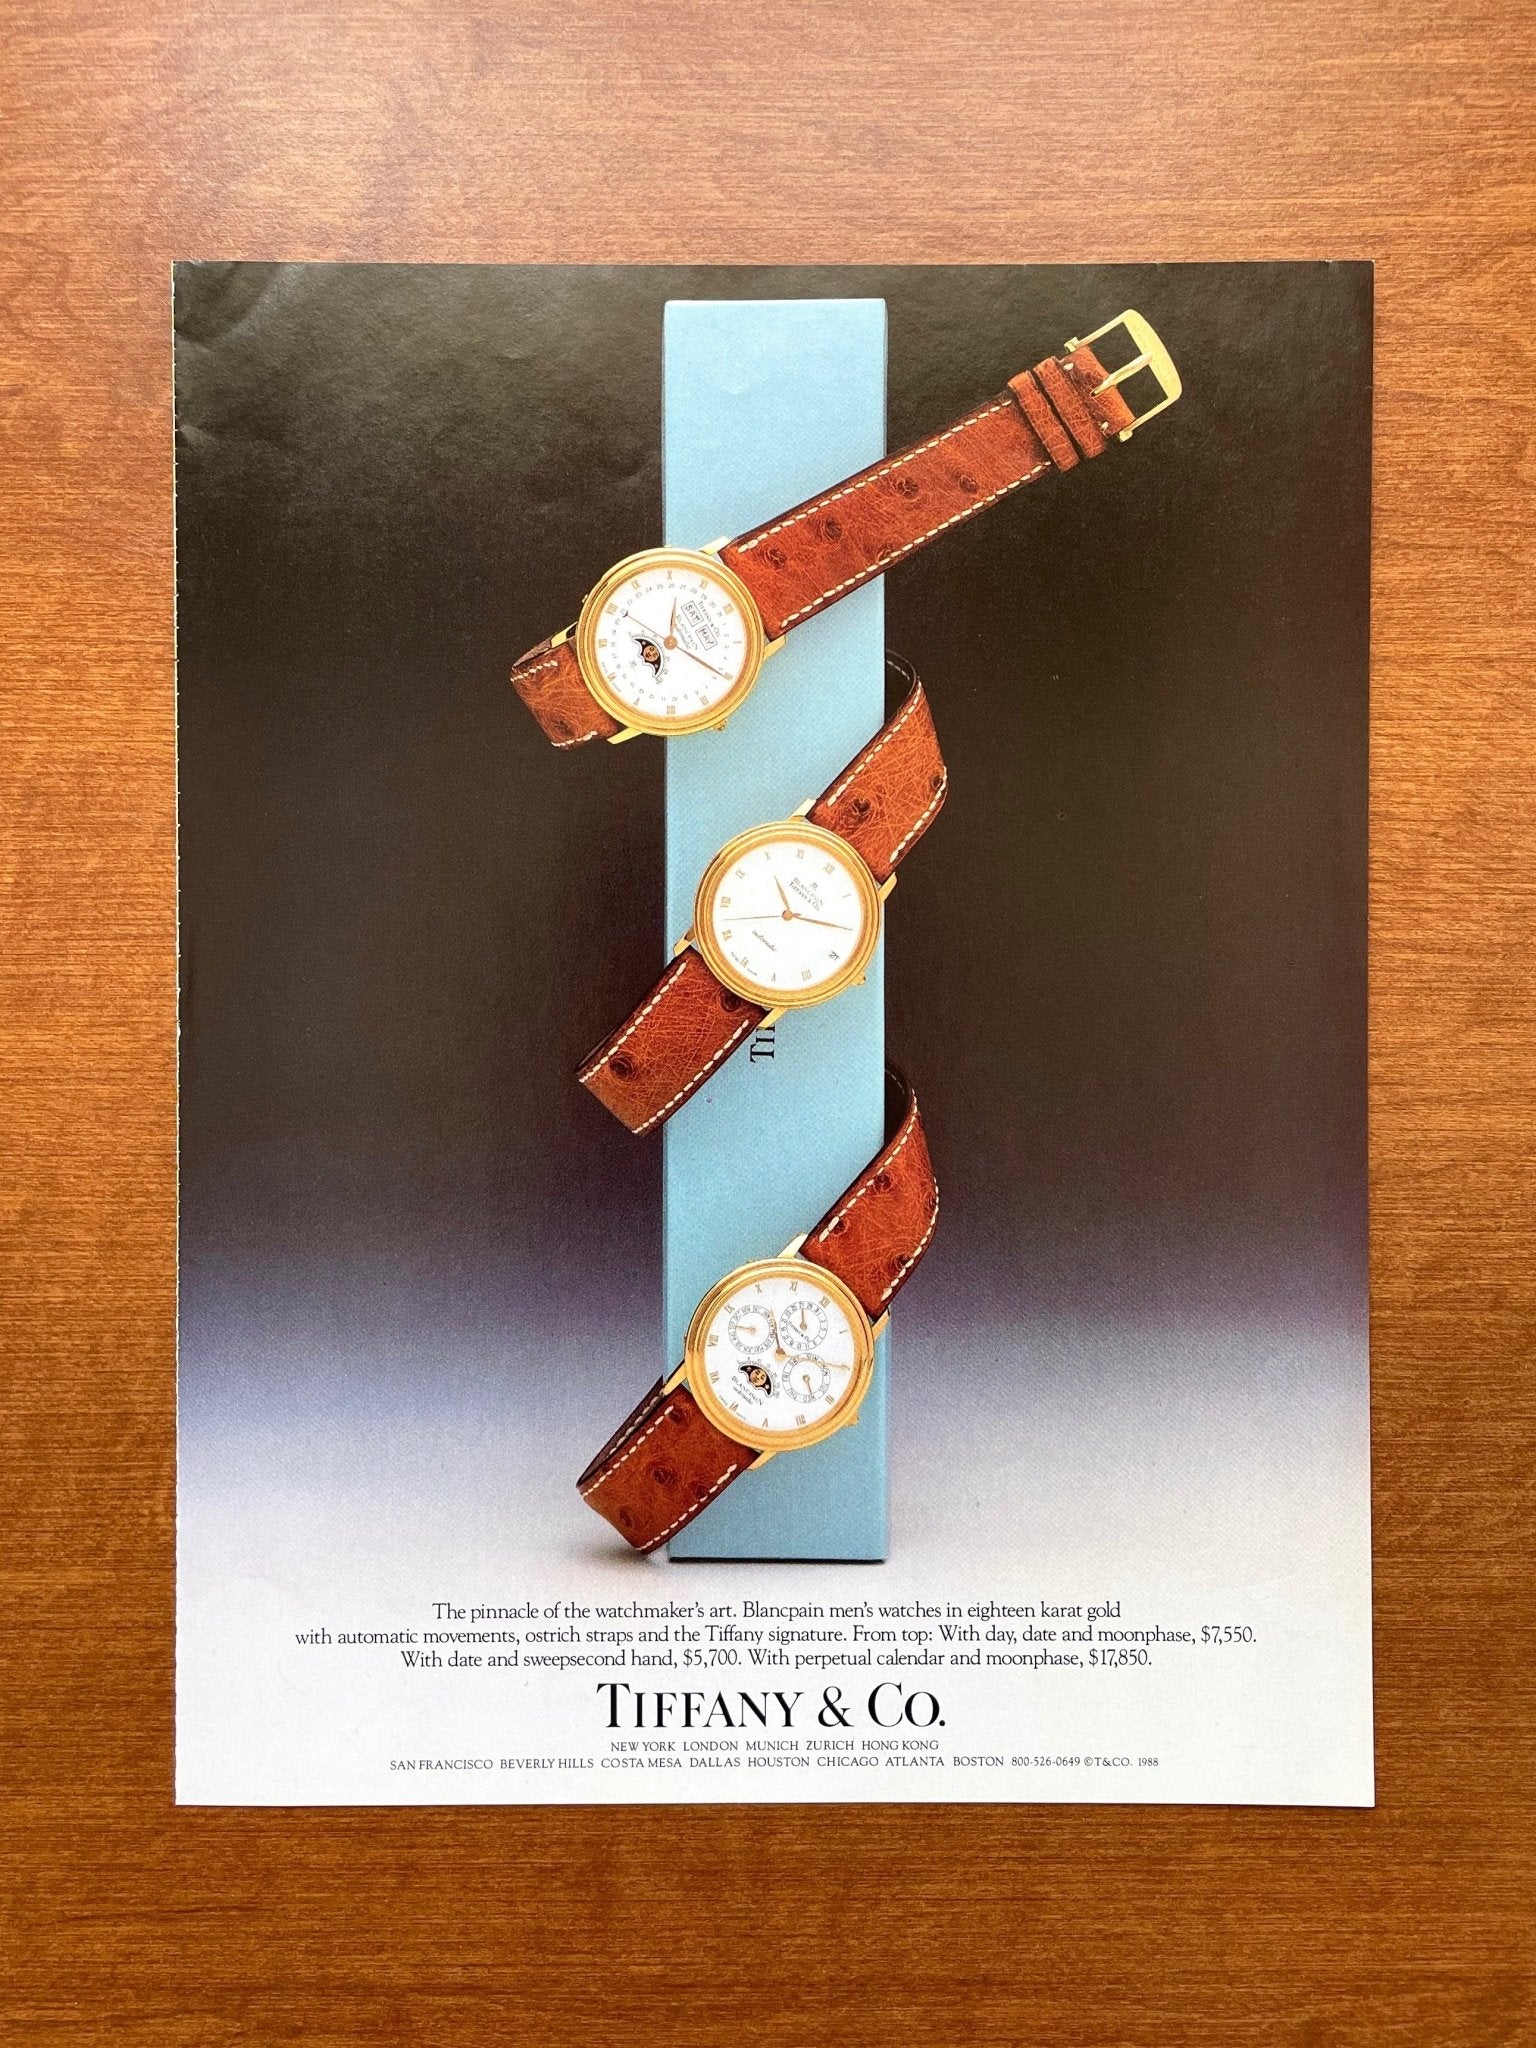 1988 Blancpain Watches double-signed Tiffany & Co. Advertisement